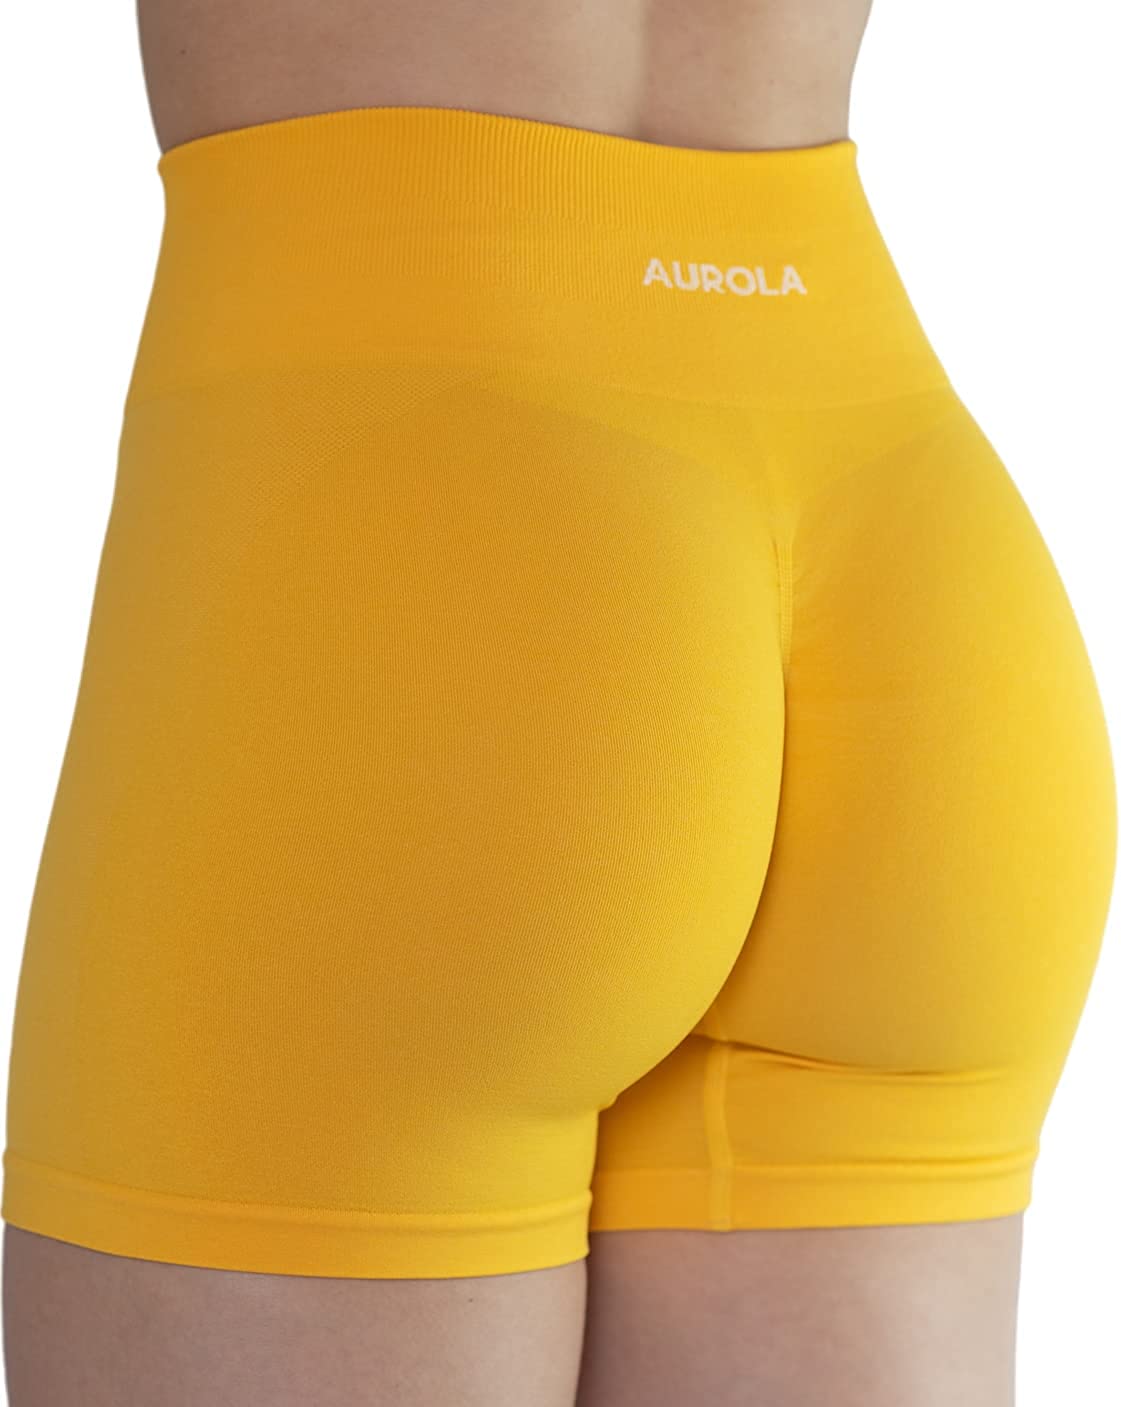 AUROLA Intensify Workout Shorts 3 Pieces Pack Sets India